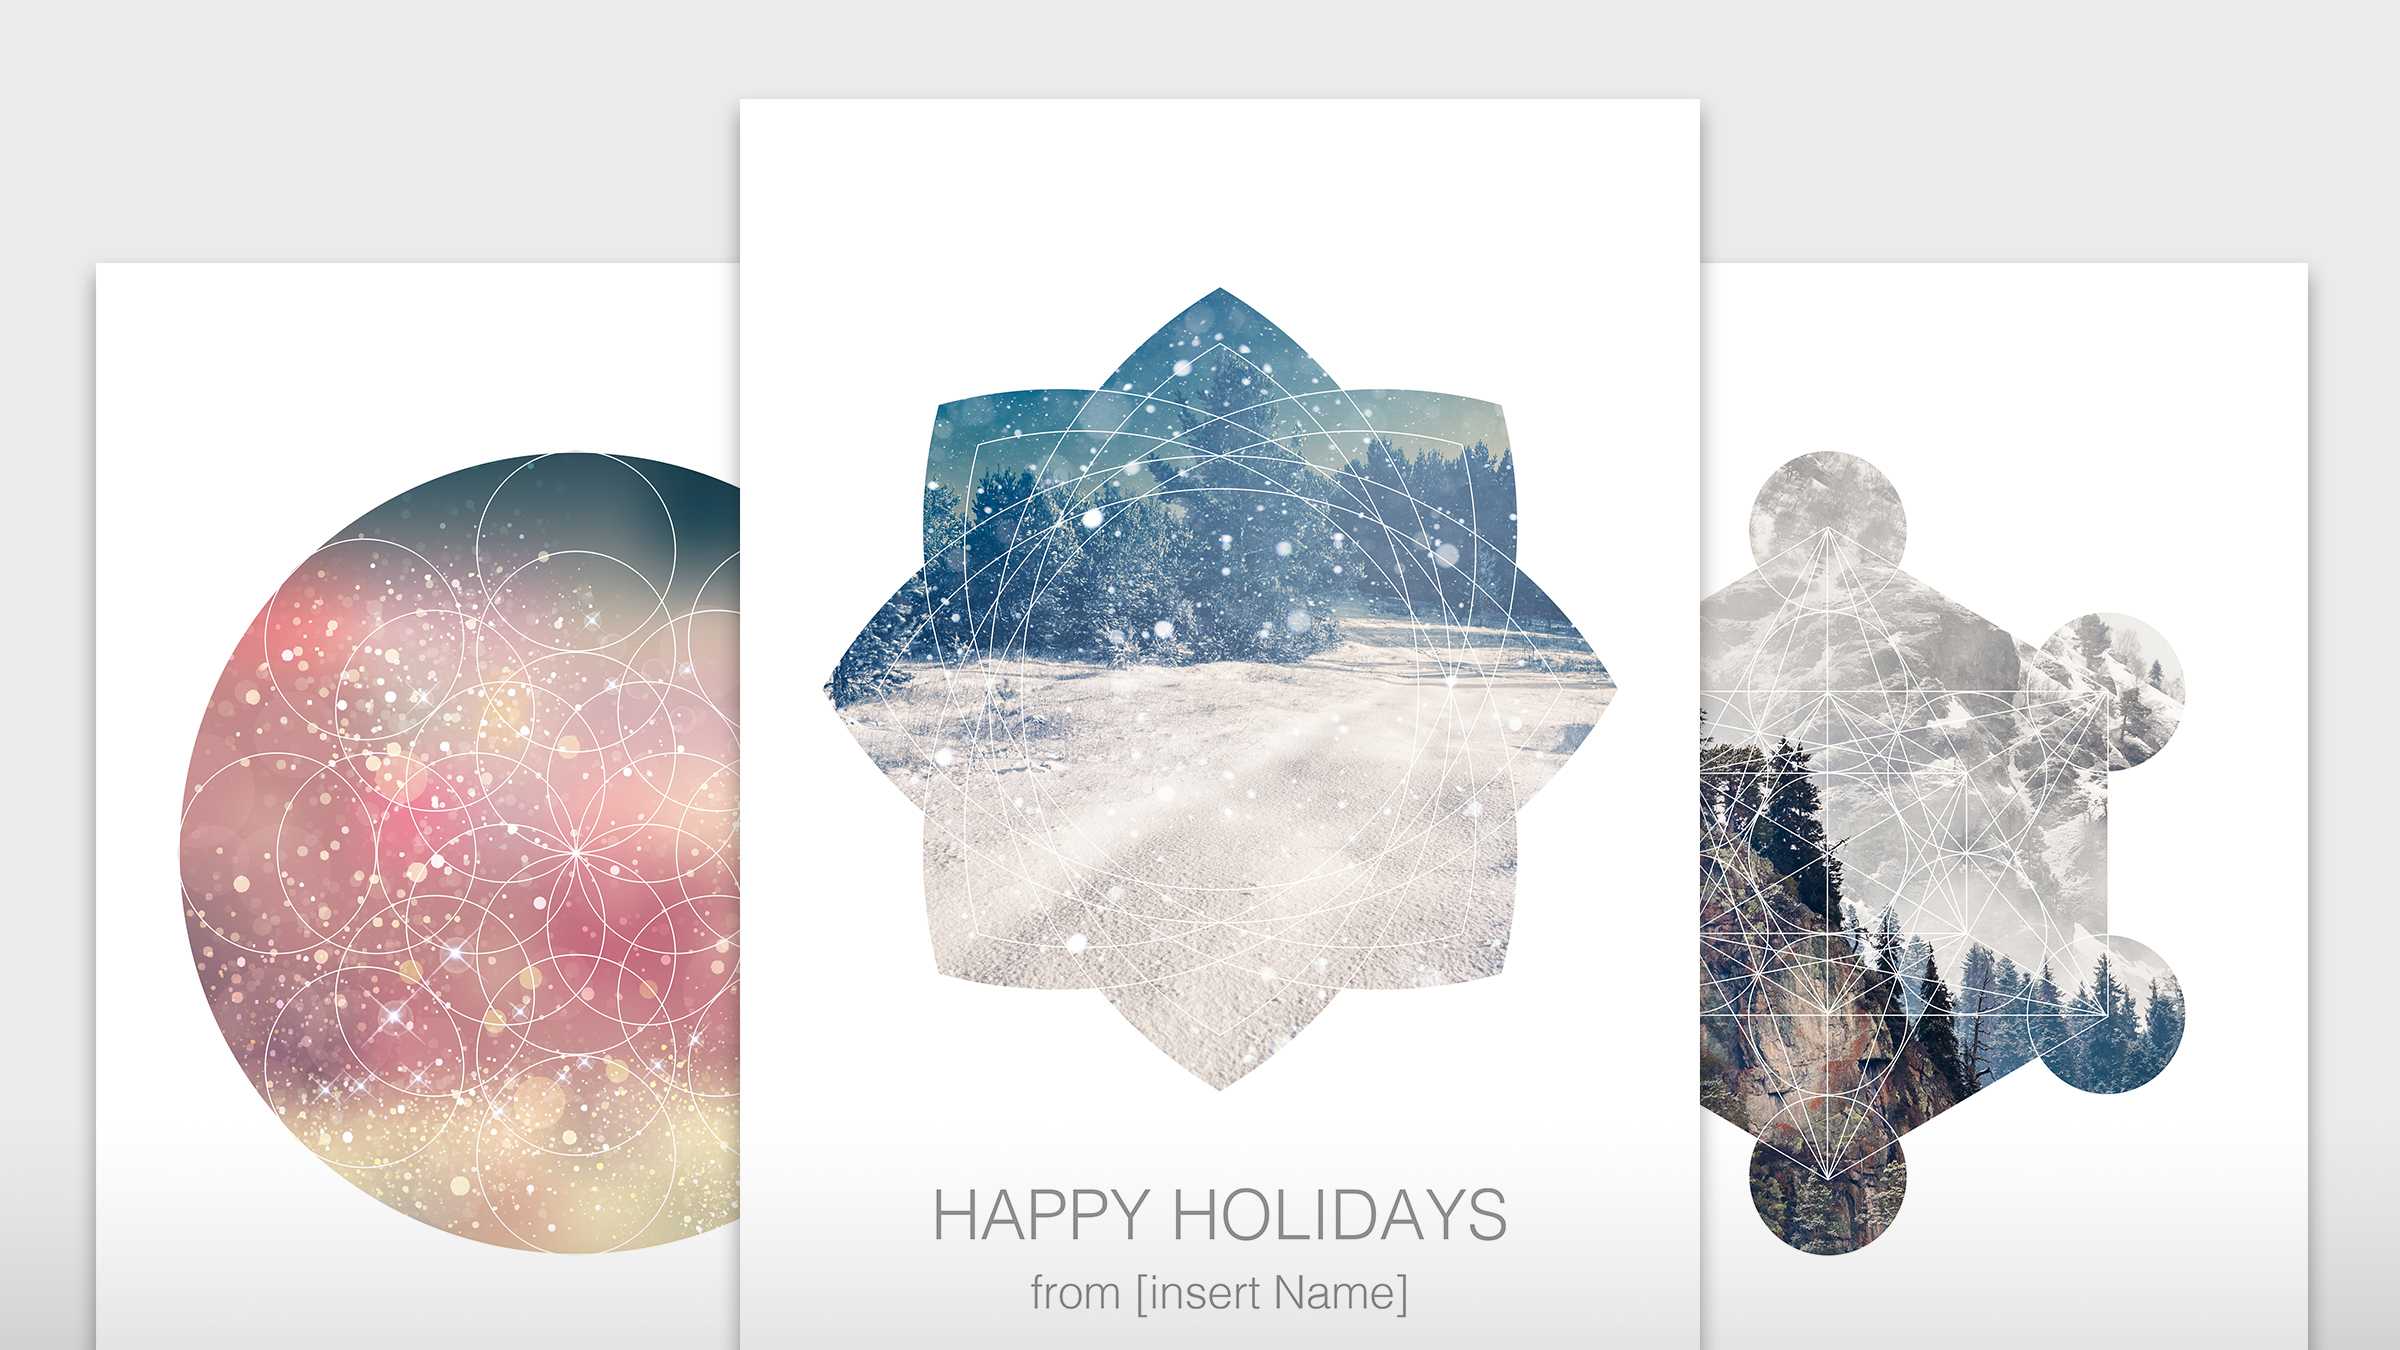 Create A Unique Holiday Card With An Adobe Stock Template In Adobe Illustrator Christmas Card Template